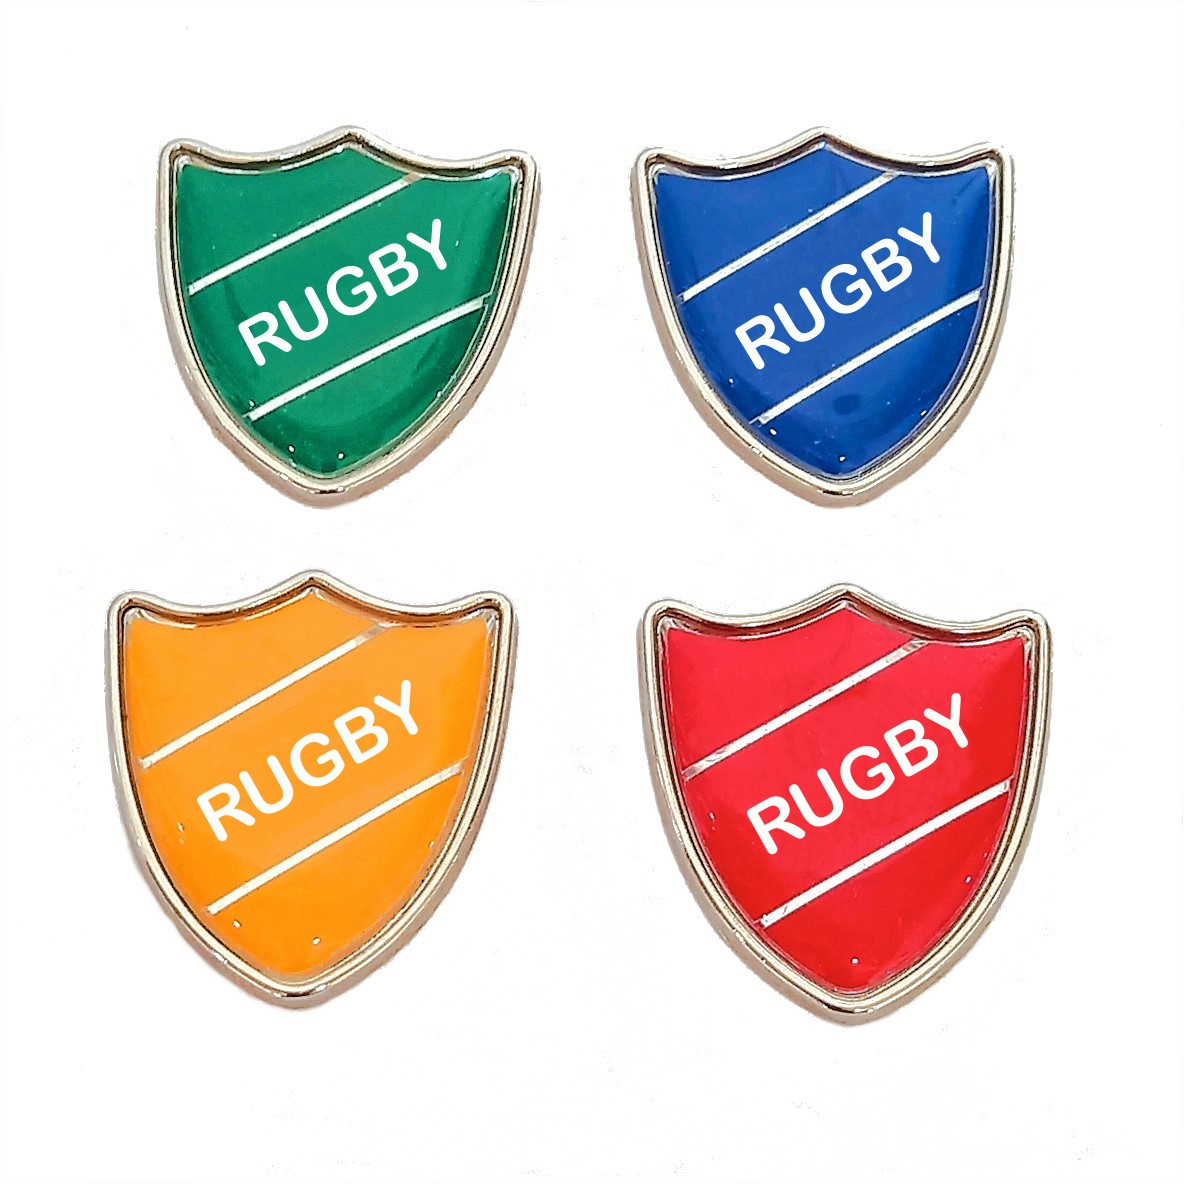 RUGBY shield badge